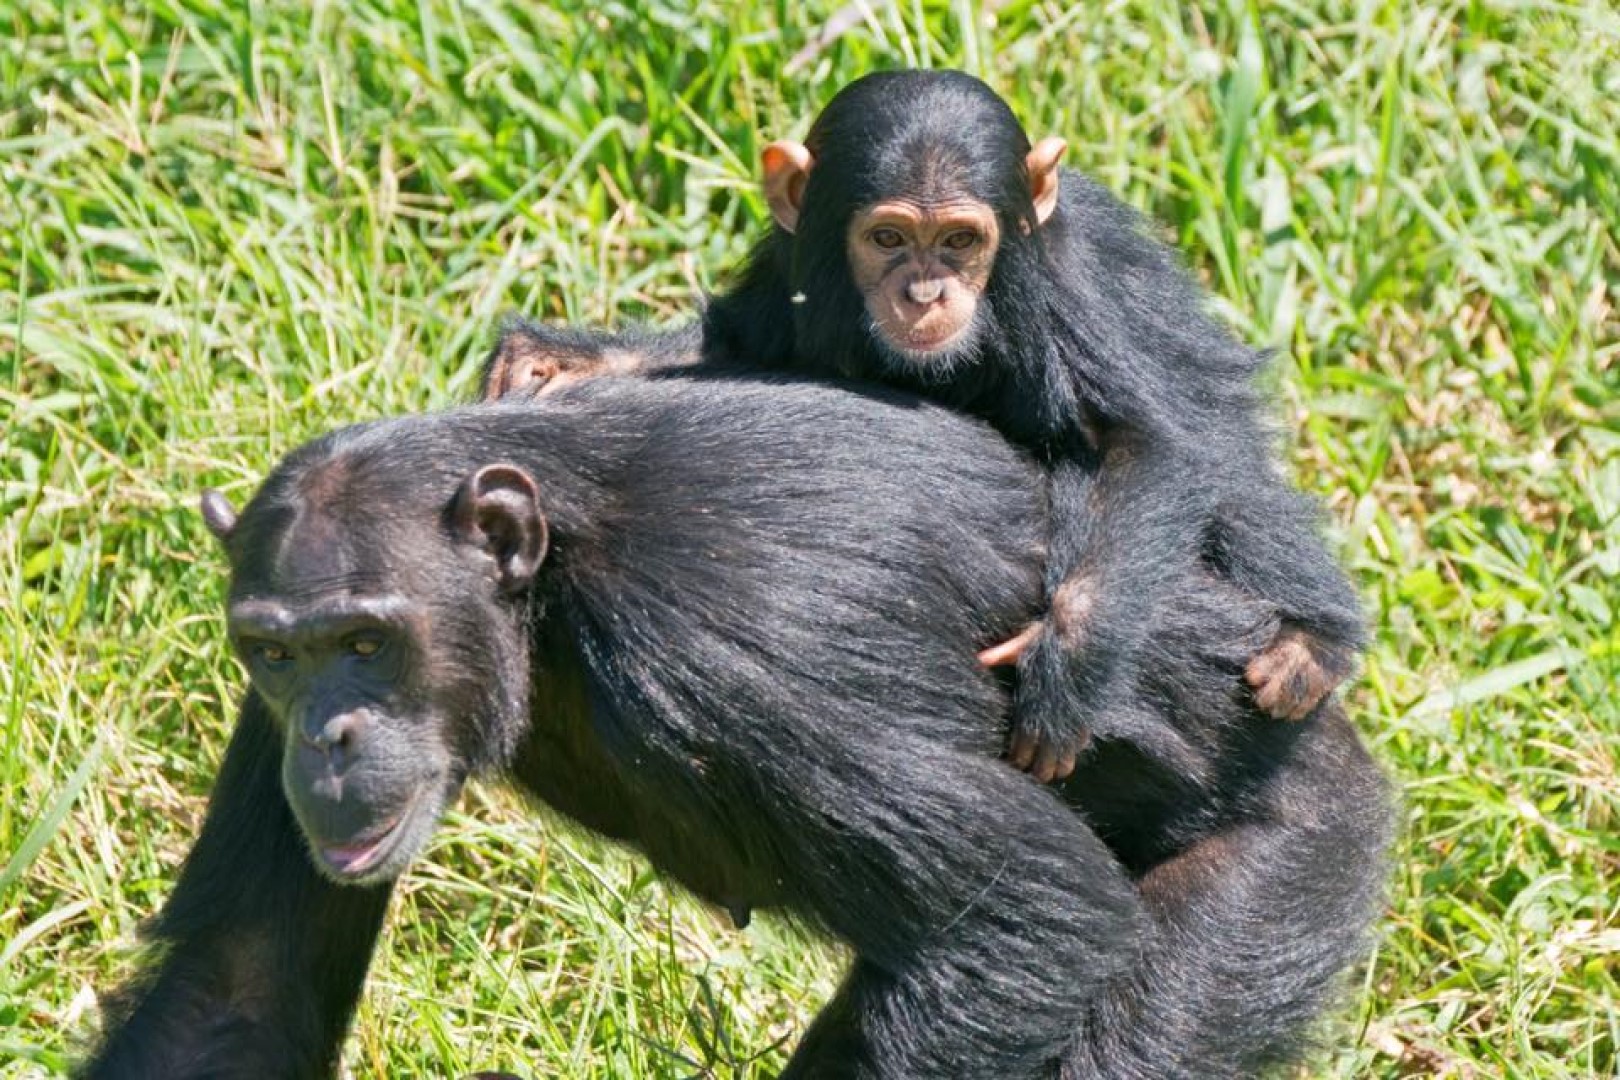 Baby chimpanzee on the back of its mother